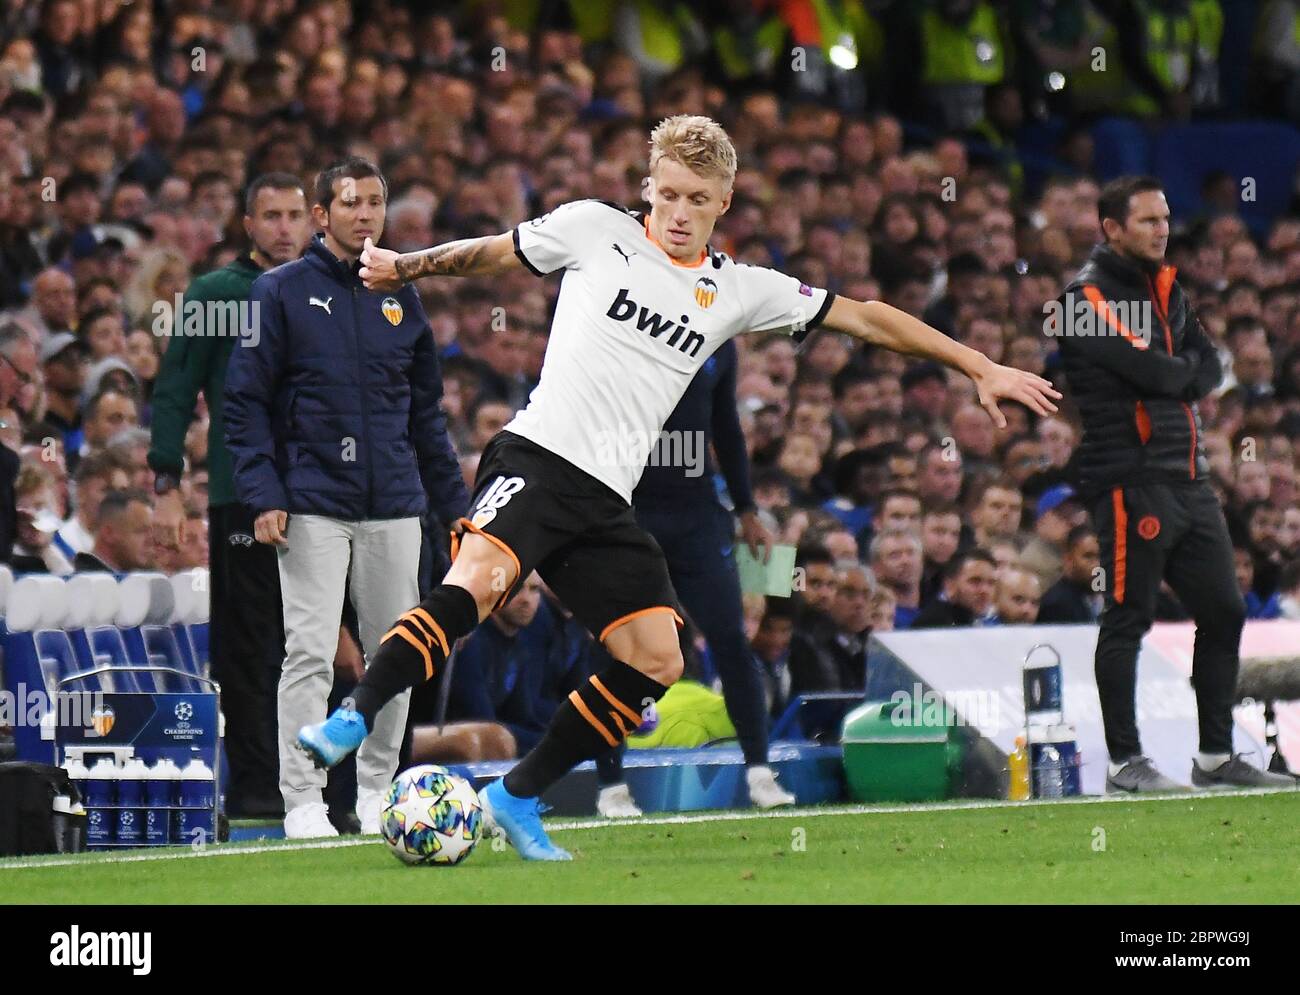 LONDON, ENGLAND - SEPTEMBER 17, 2019: Daniel Wass of Valencia pictured during the 2019/20 UEFA Champions League Group H game between Chelsea FC (England) and Valencia CF (Spain) at Stamford Bridge. Stock Photo